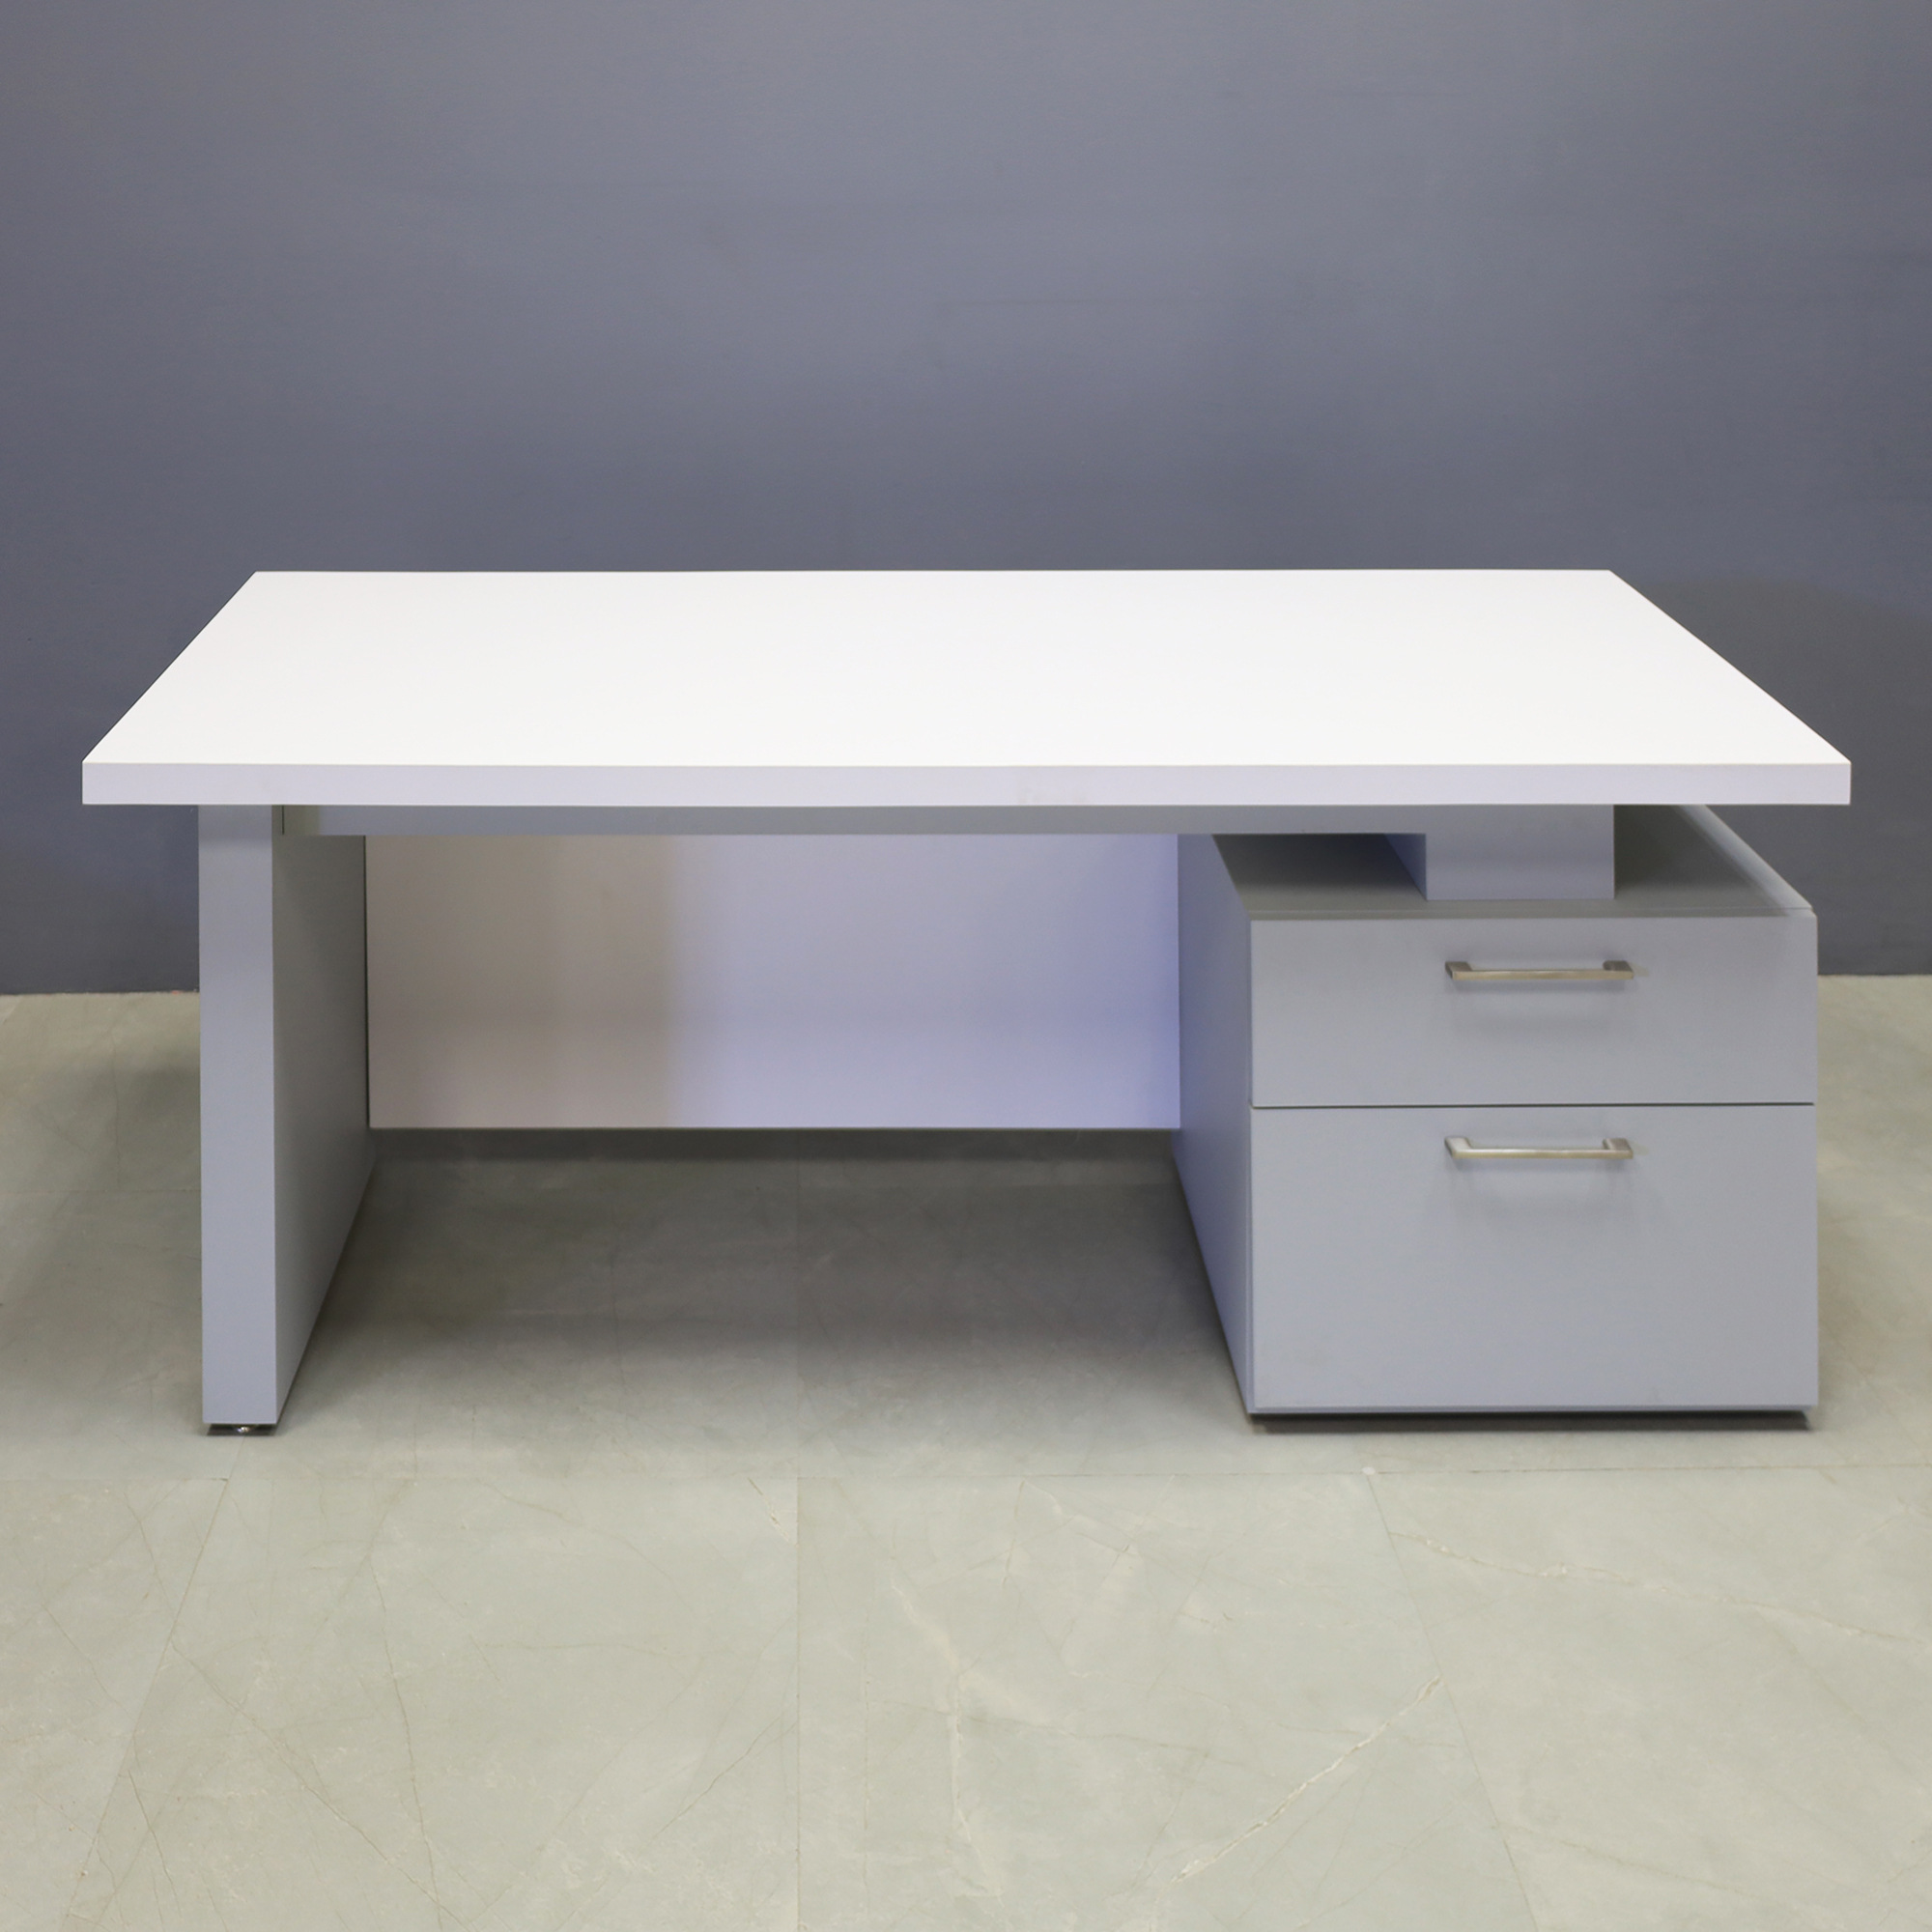 72-inch Avenue Straight Executive Desk in white matte laminate top and privacy panel, and light gray pvc base & storage on the right side when sitting, shown here.